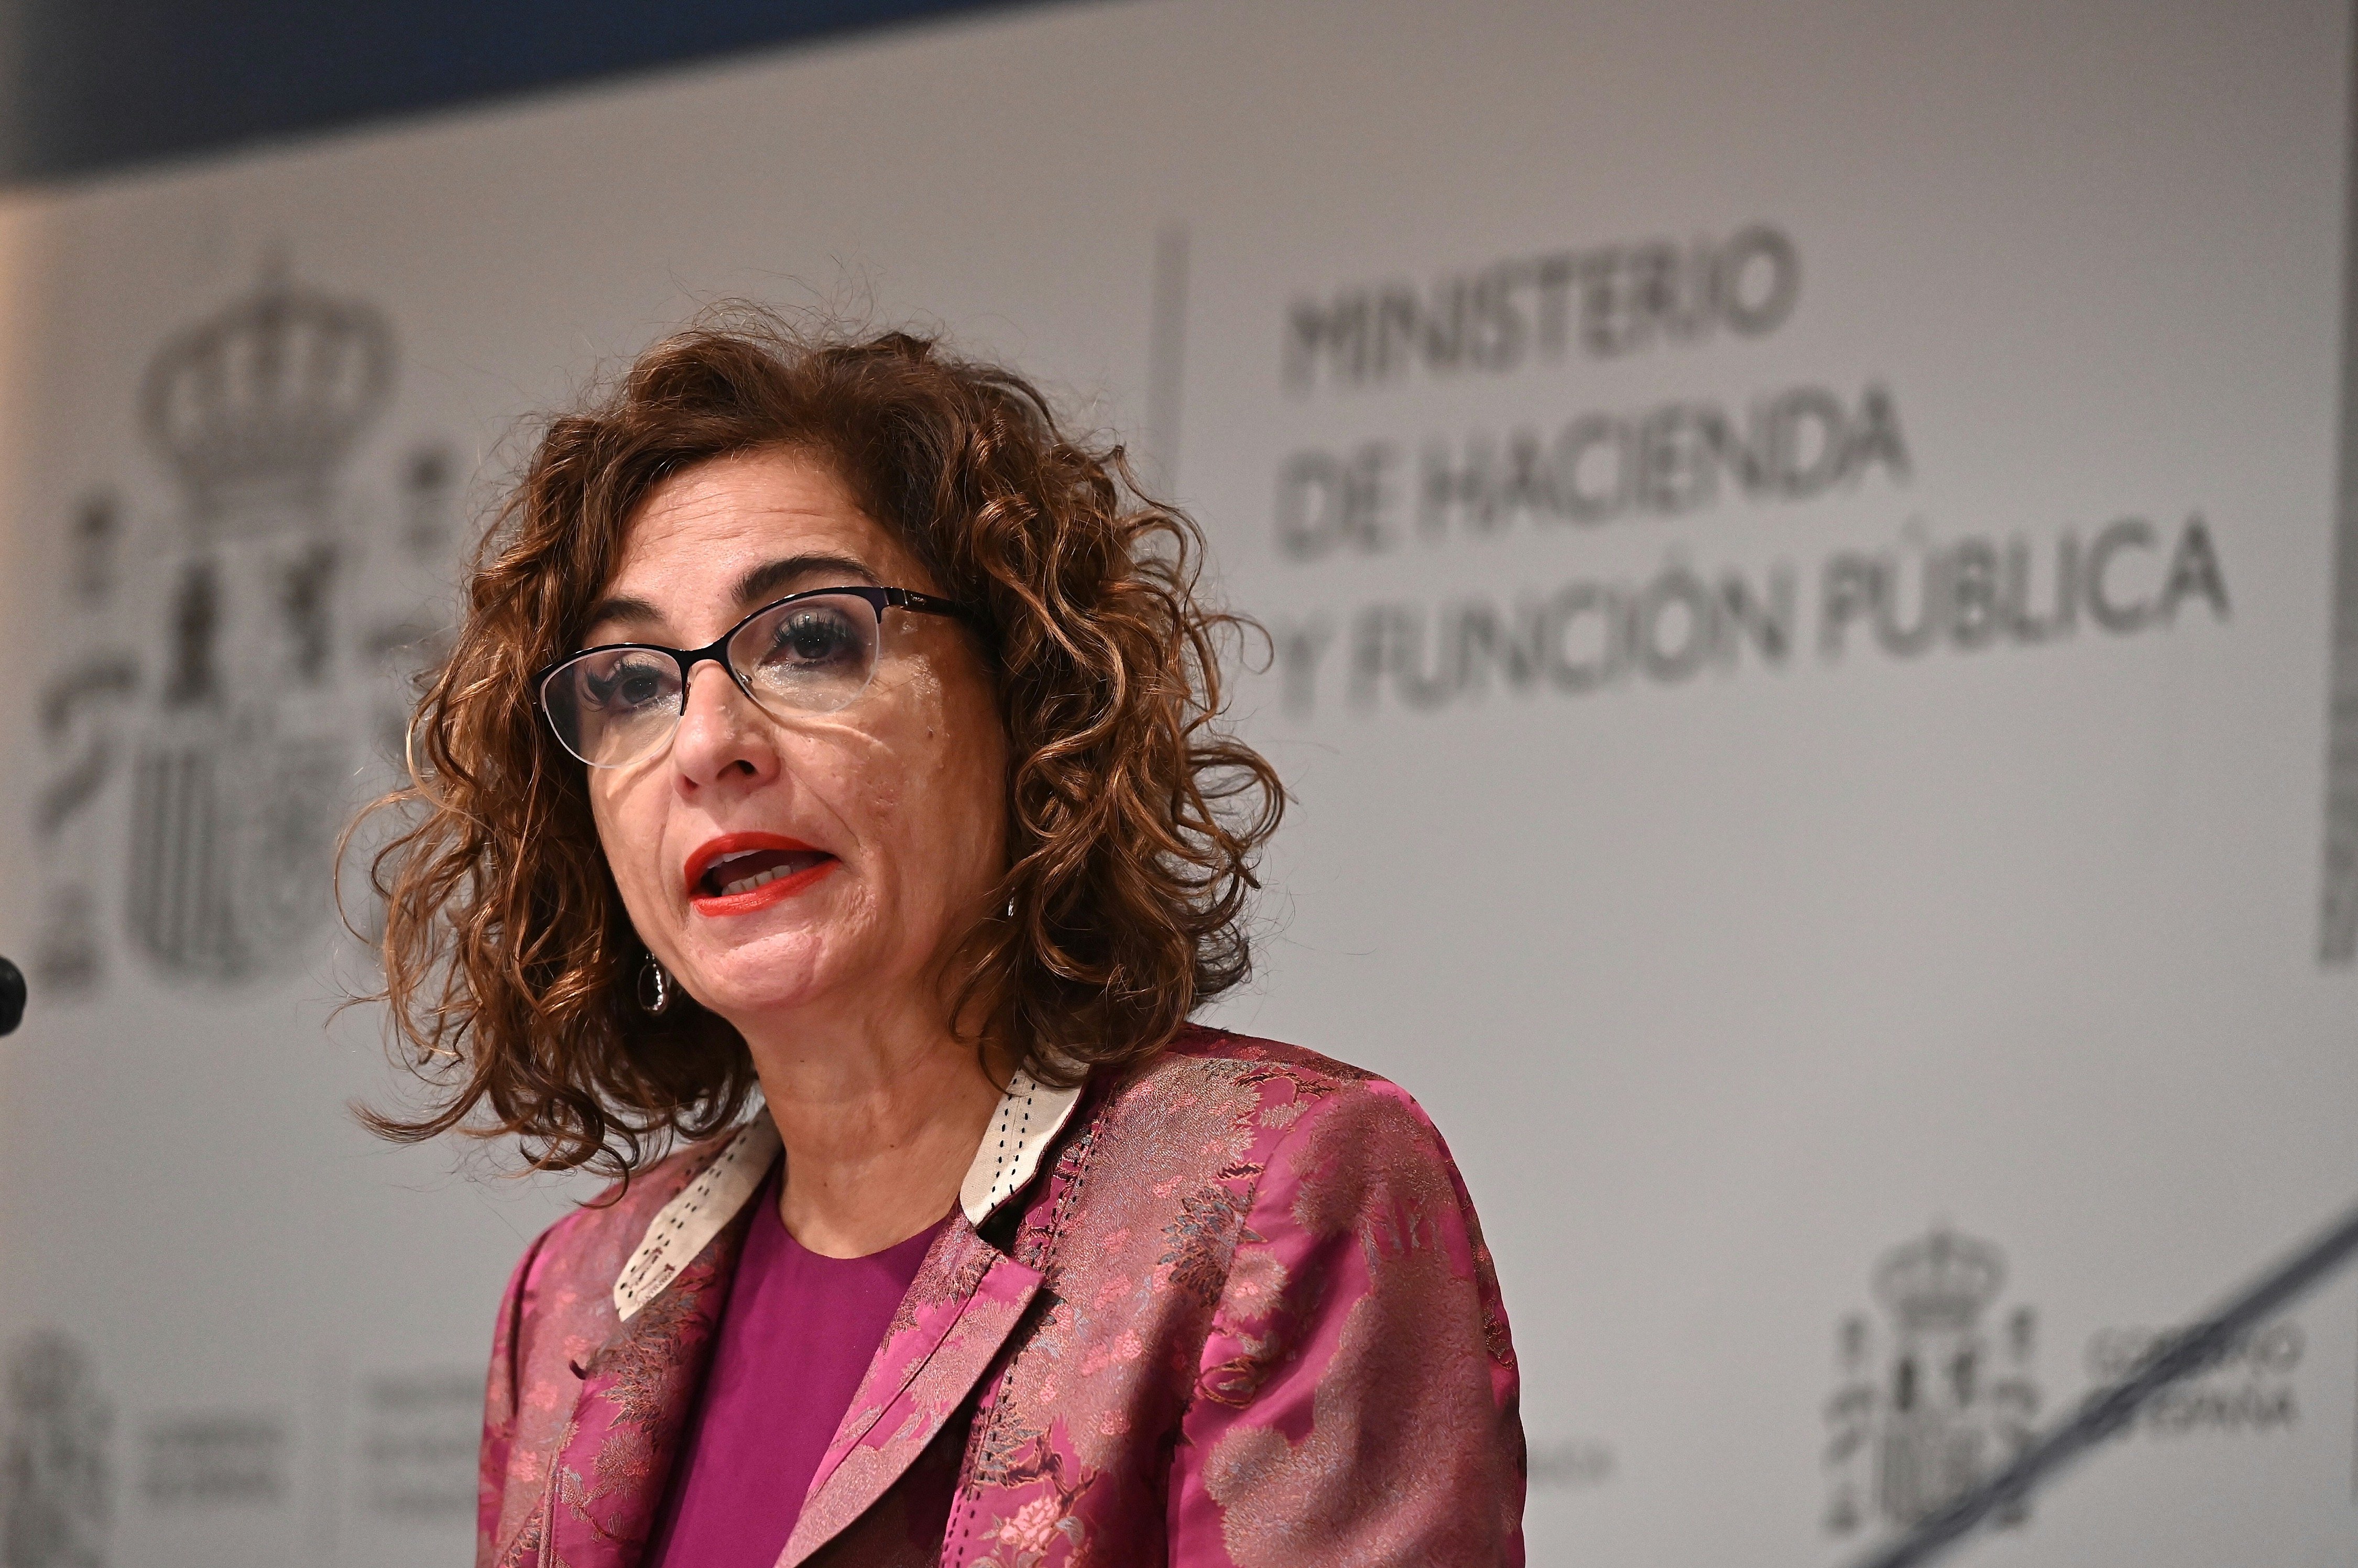 Spanish government to apply tax benefits for incomes up to 21,000 euros a year